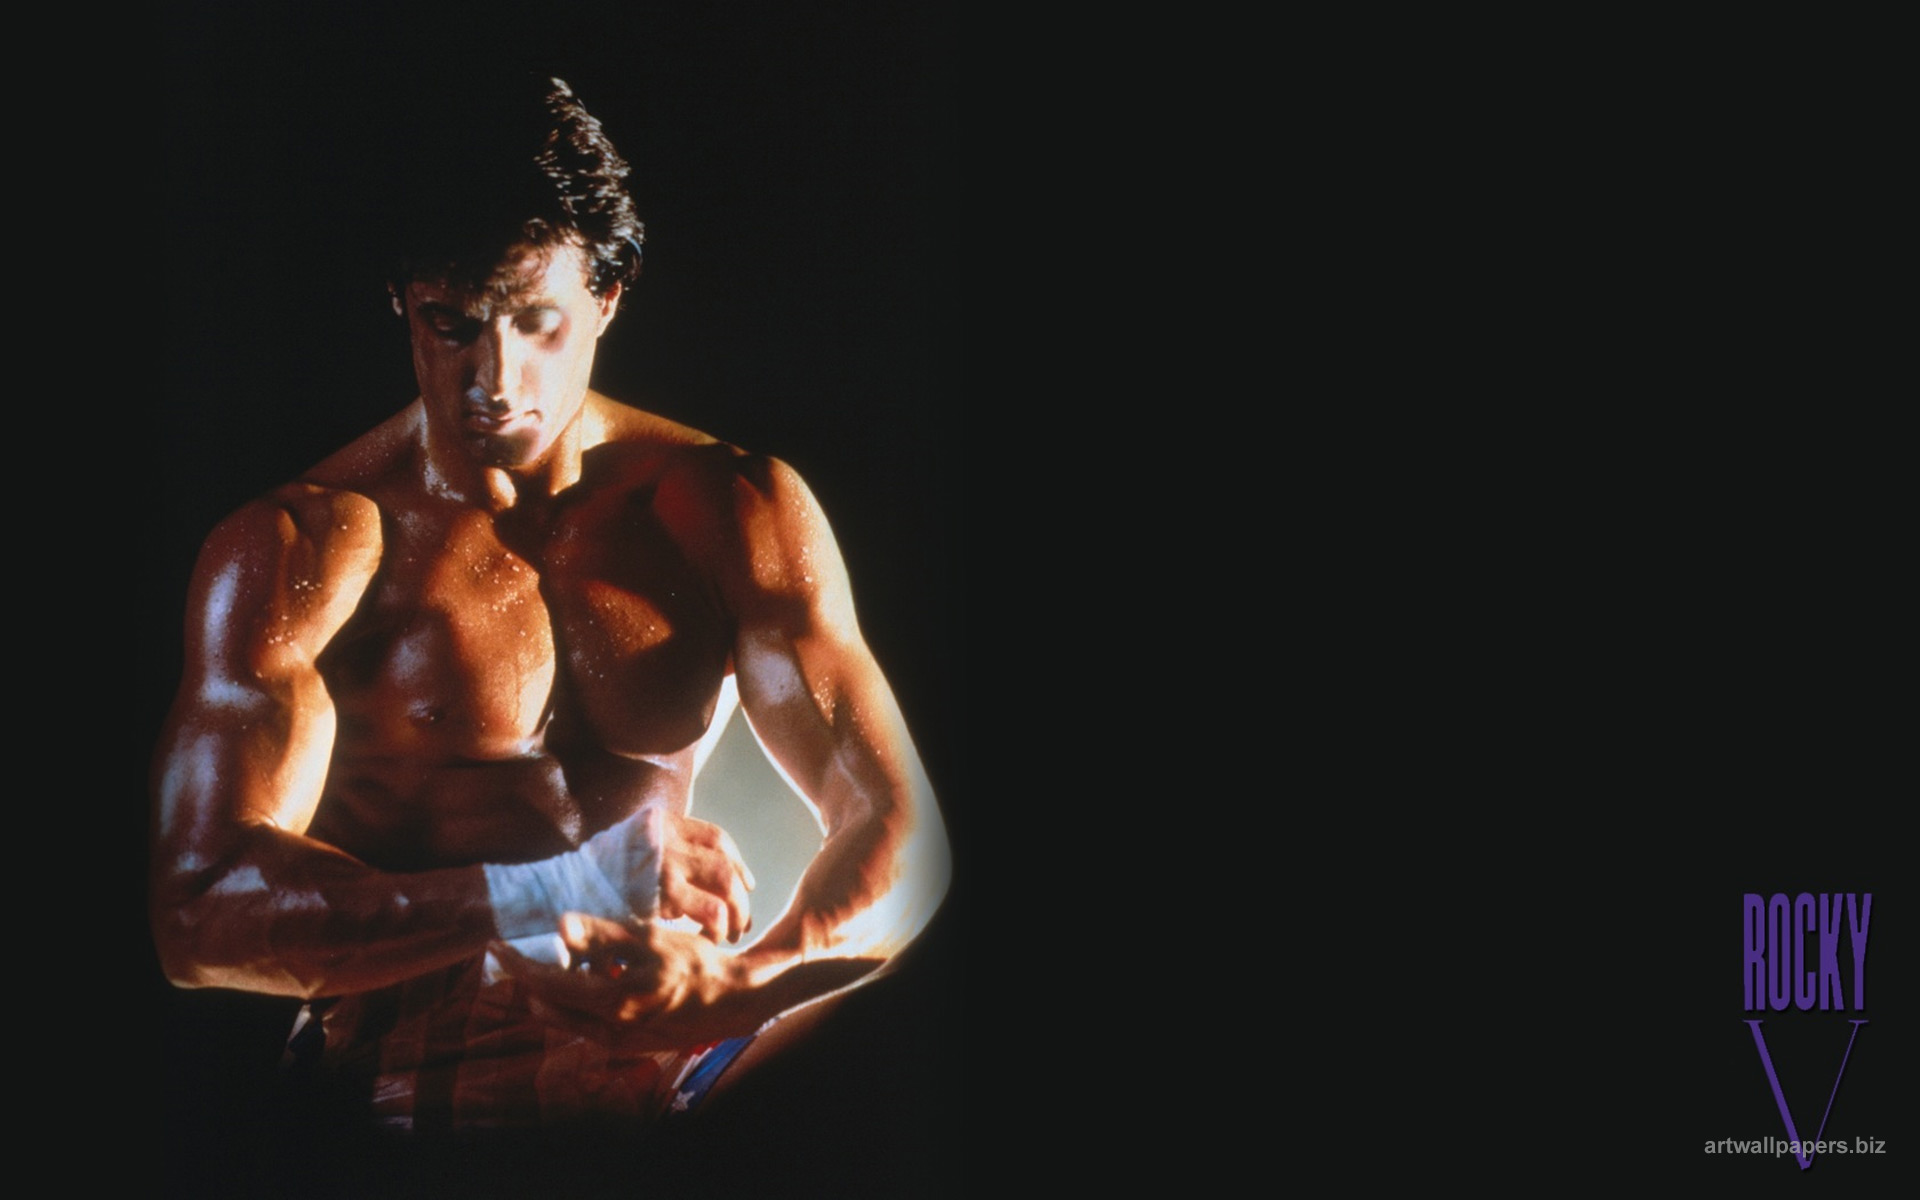 rocky balboa wallpaper hd,barechested,muscle,bodybuilding,arm,chest